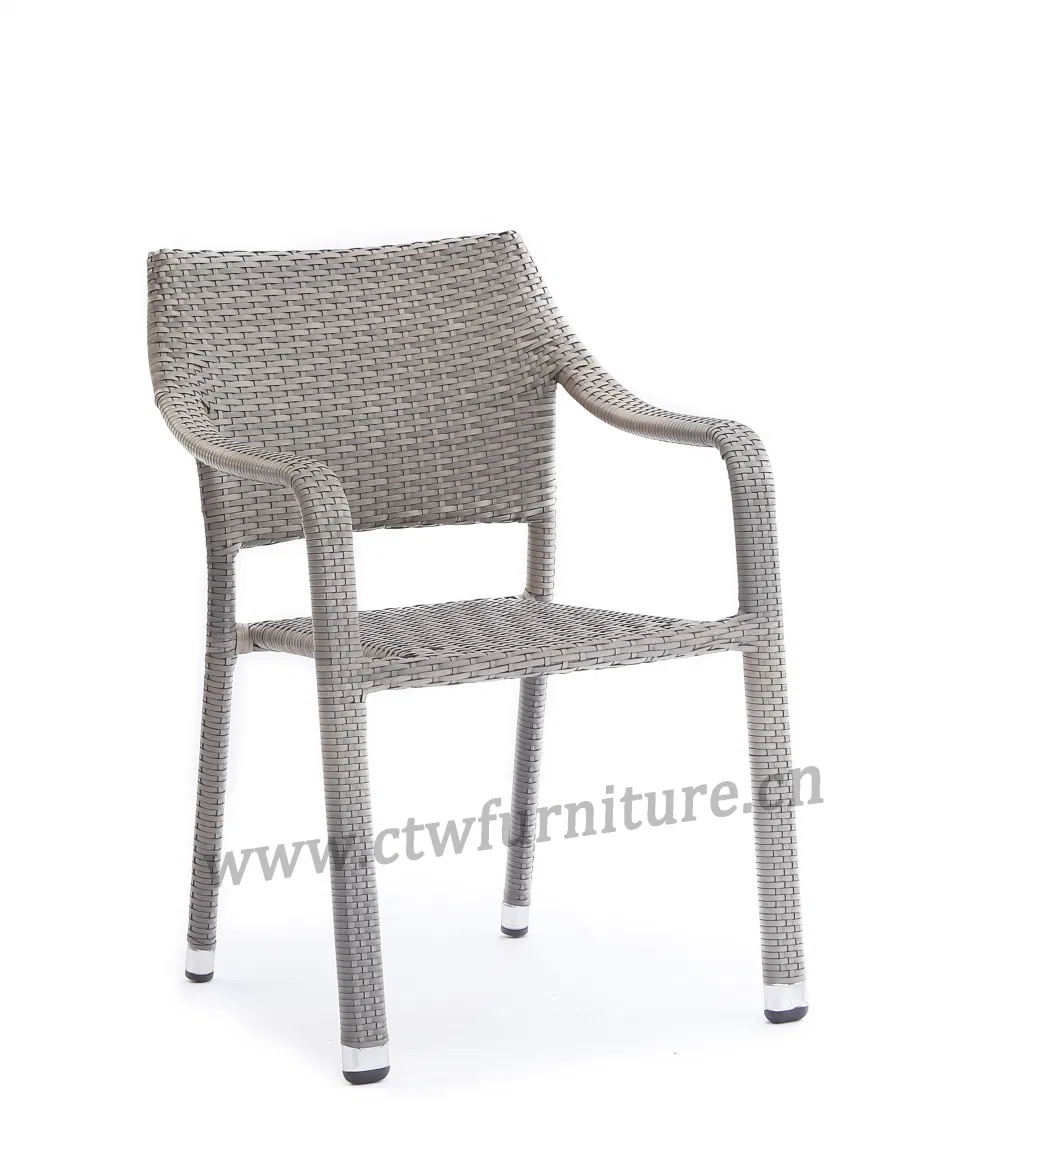 High Quality Vintage Outdoor Furniture Garden Chairs Seating Wicker Rattan Patio Chair